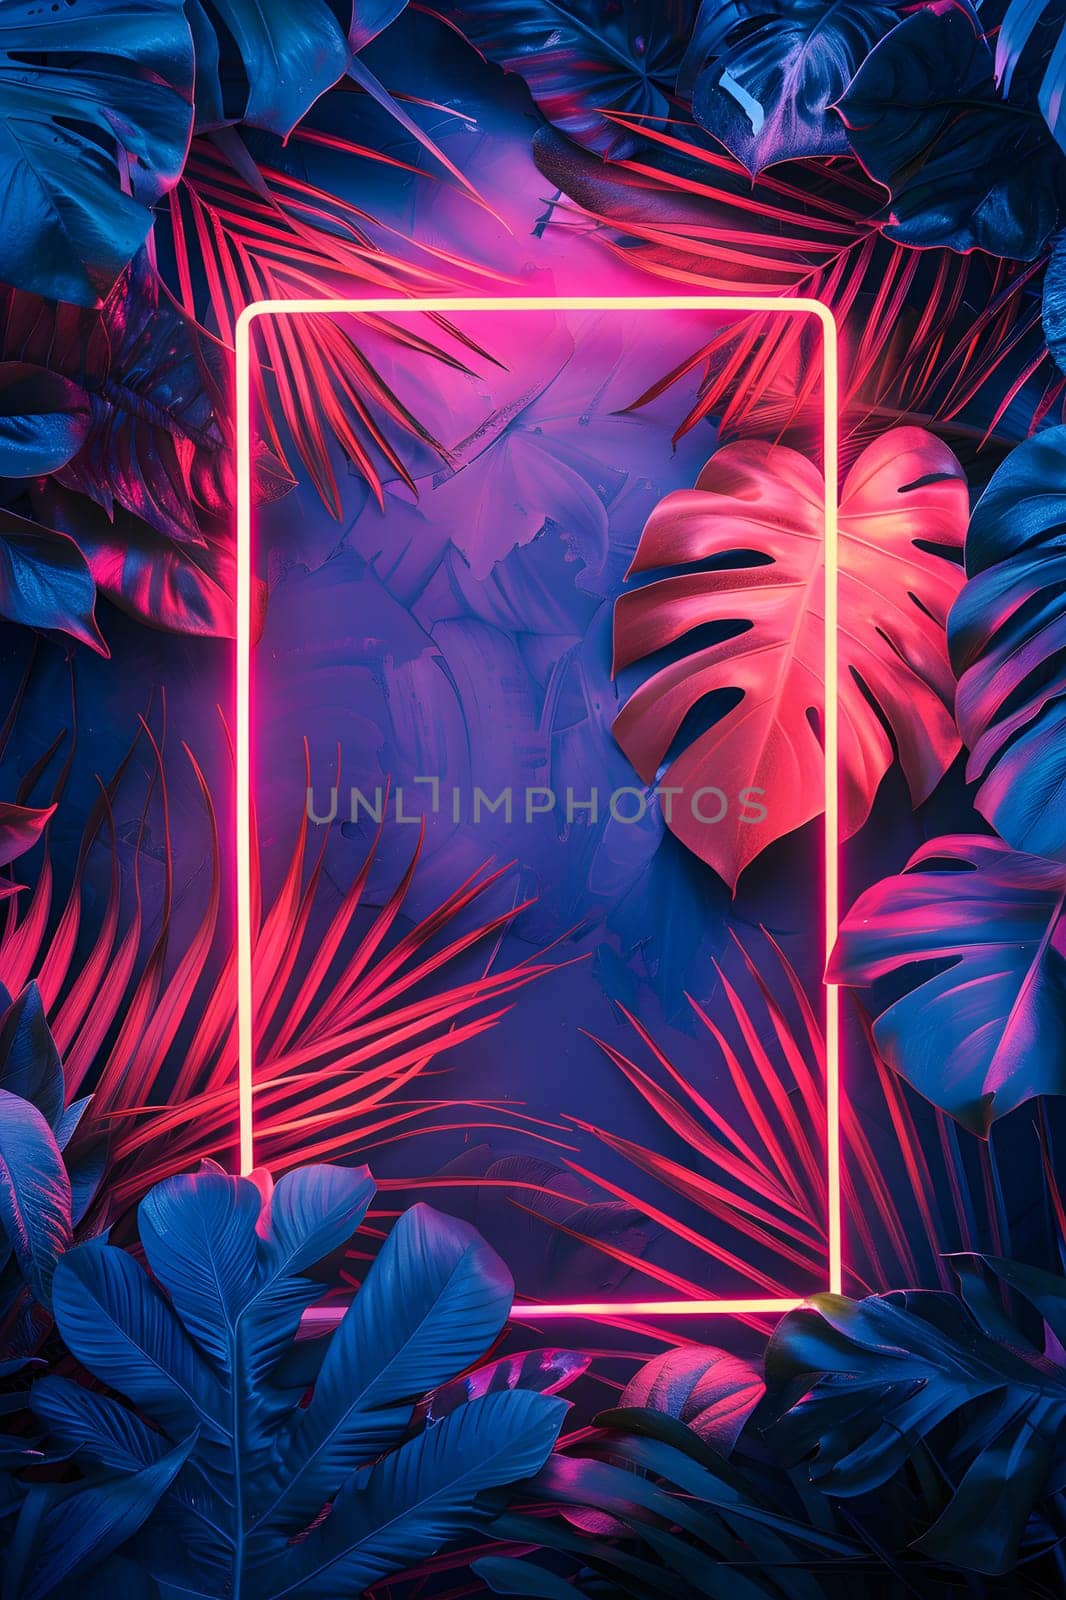 An electric blue neon frame, adorned with tropical leaves in shades of blue, purple, and magenta, creating a striking visual effect in the dark